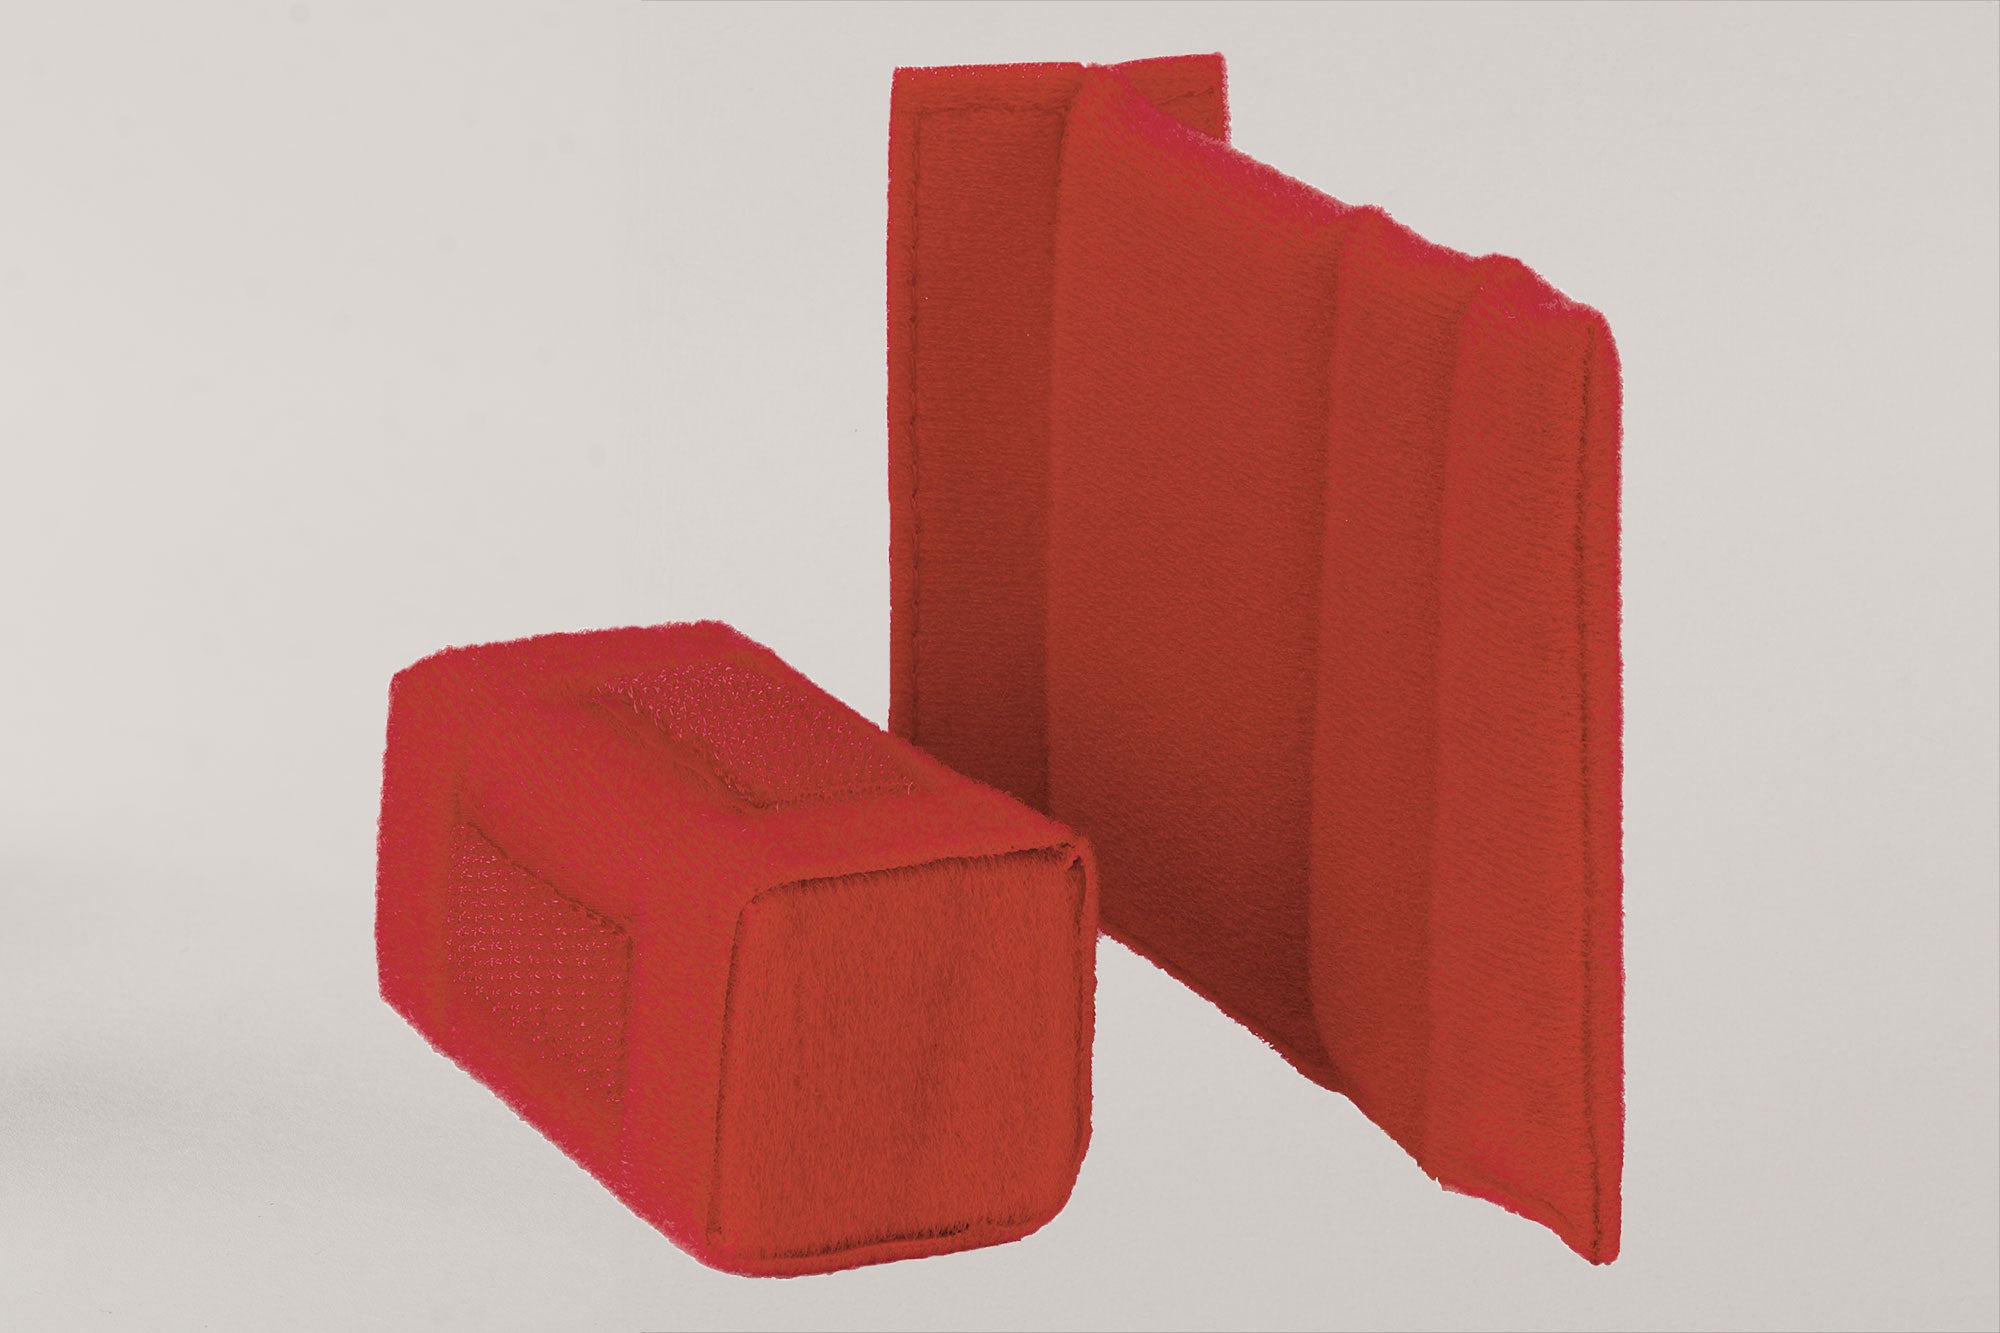 Additional pads 9x12 + cuboid red